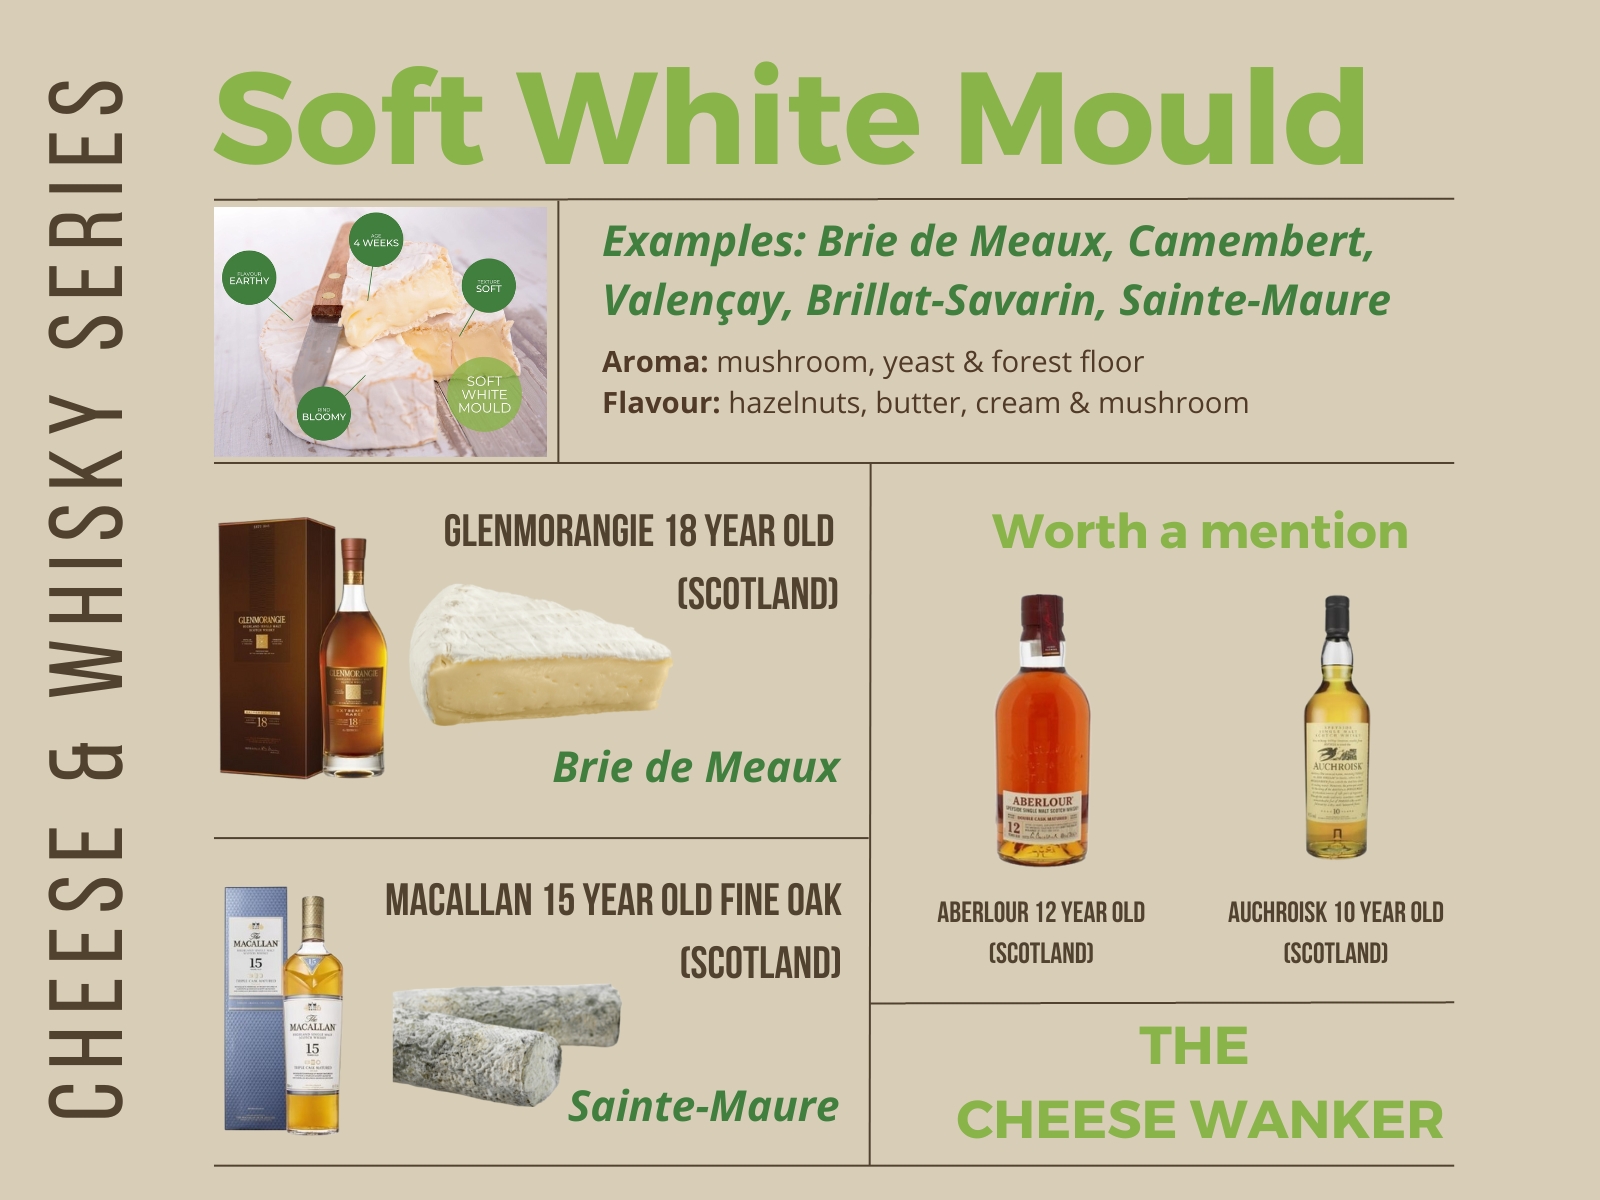 Soft White Mould X Whisky